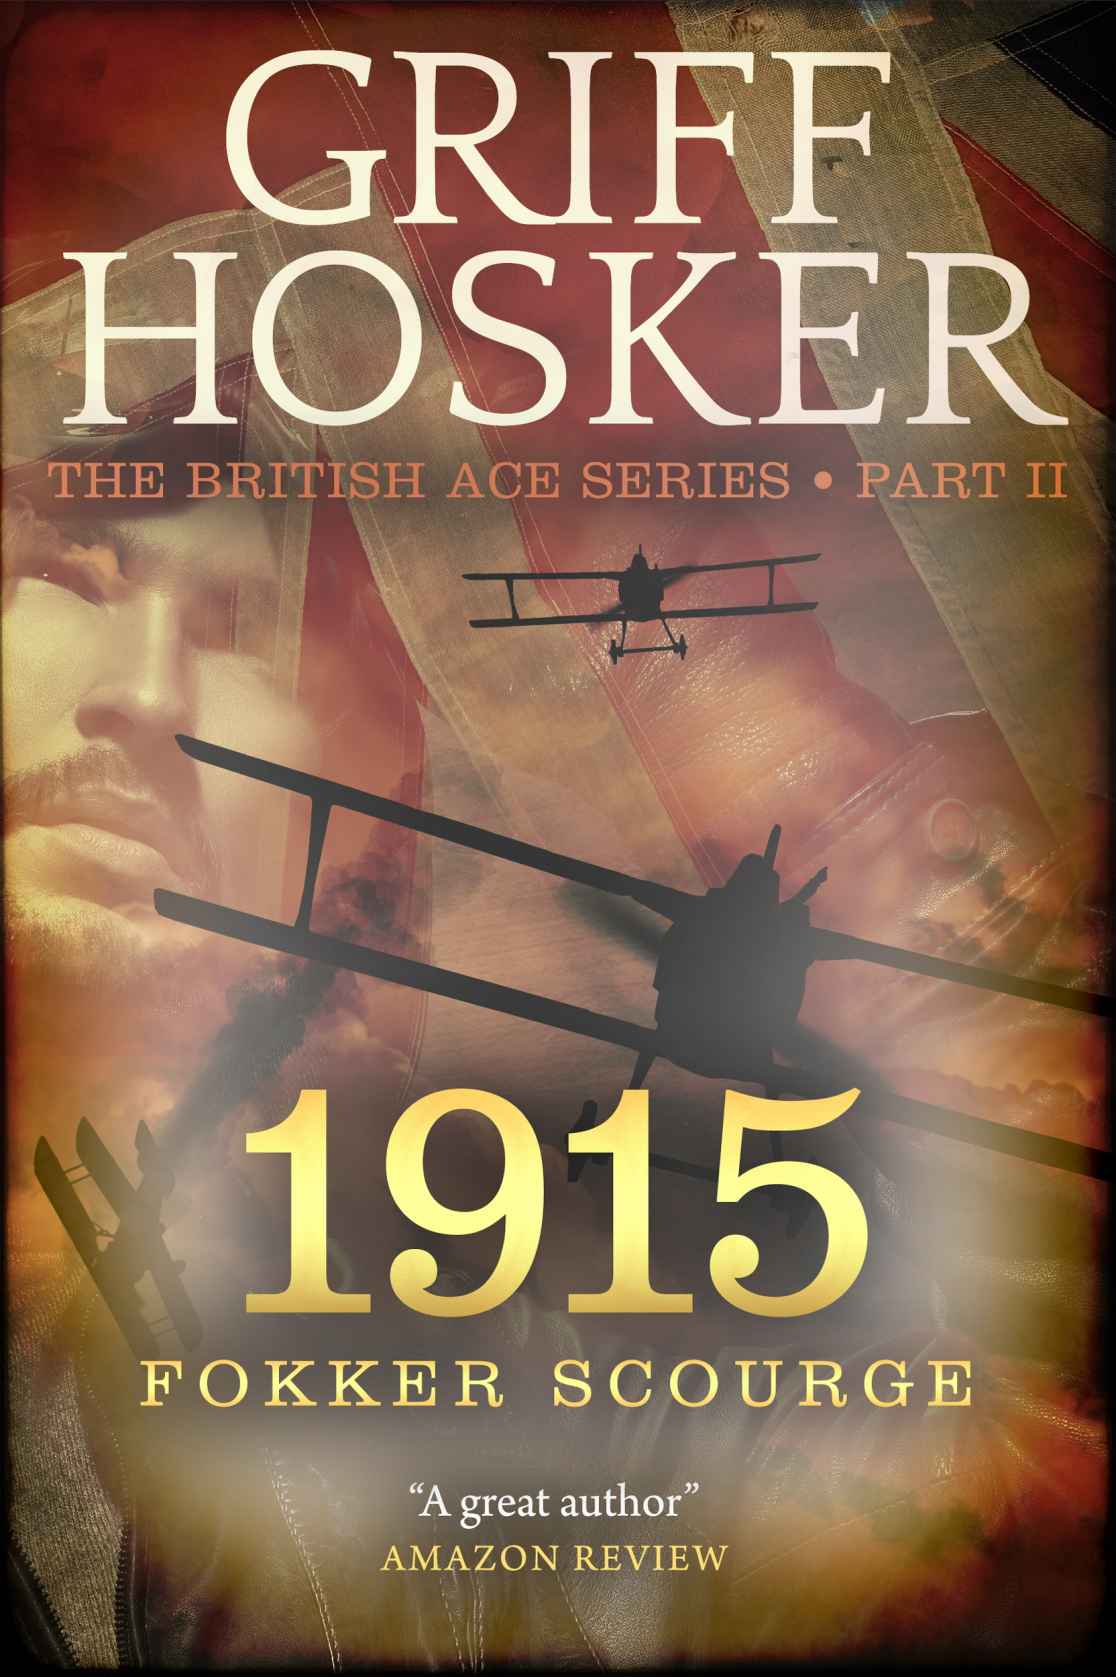 1915 Fokker Scourge (British Ace Book 2) by Griff Hosker